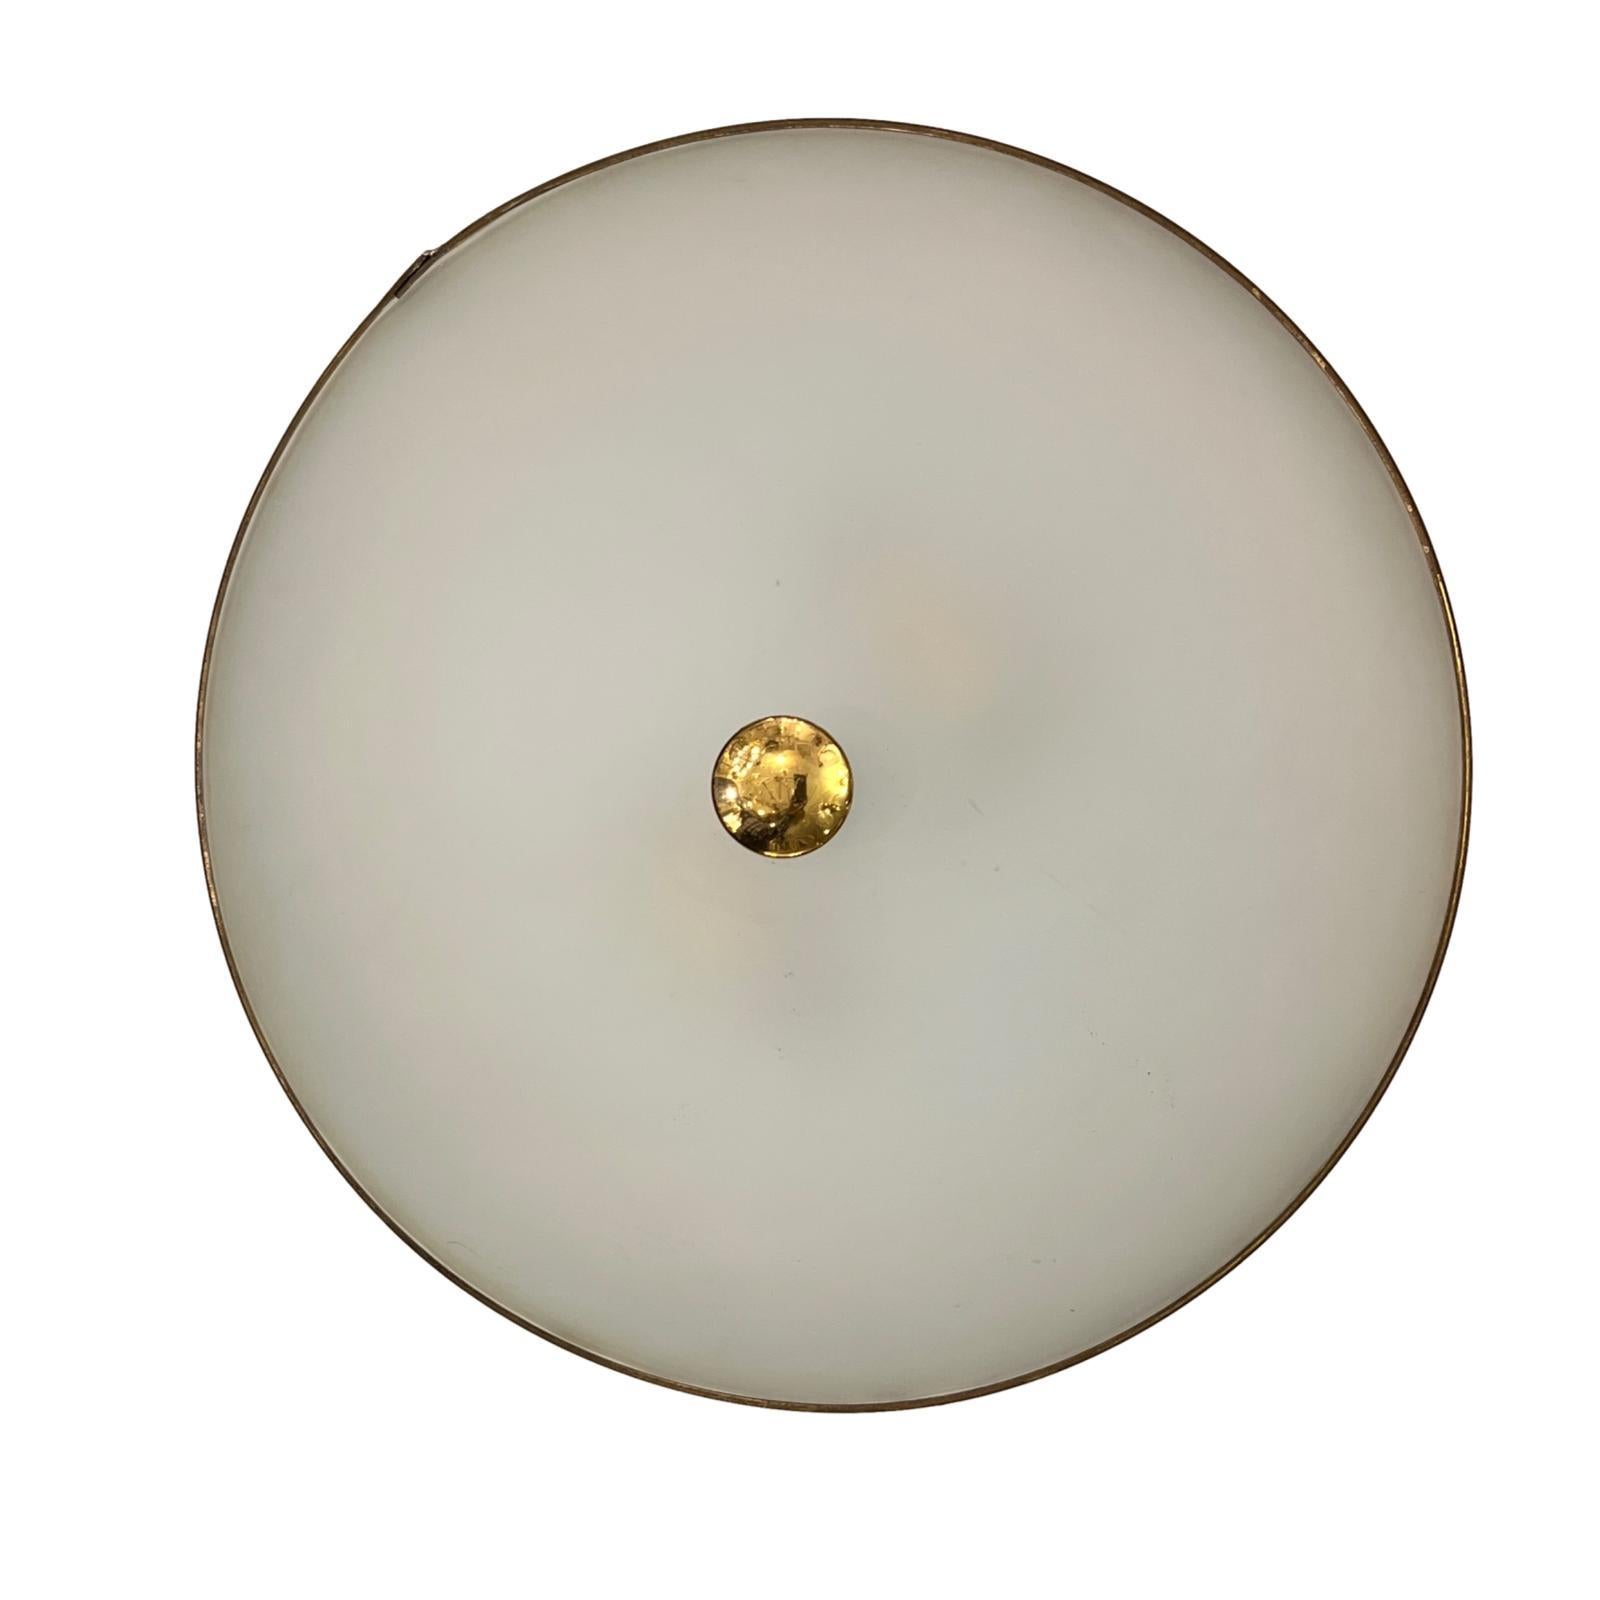 An Italian circa 1950's light fixture with frosted glass inset.

Measurements:
Drop: 5